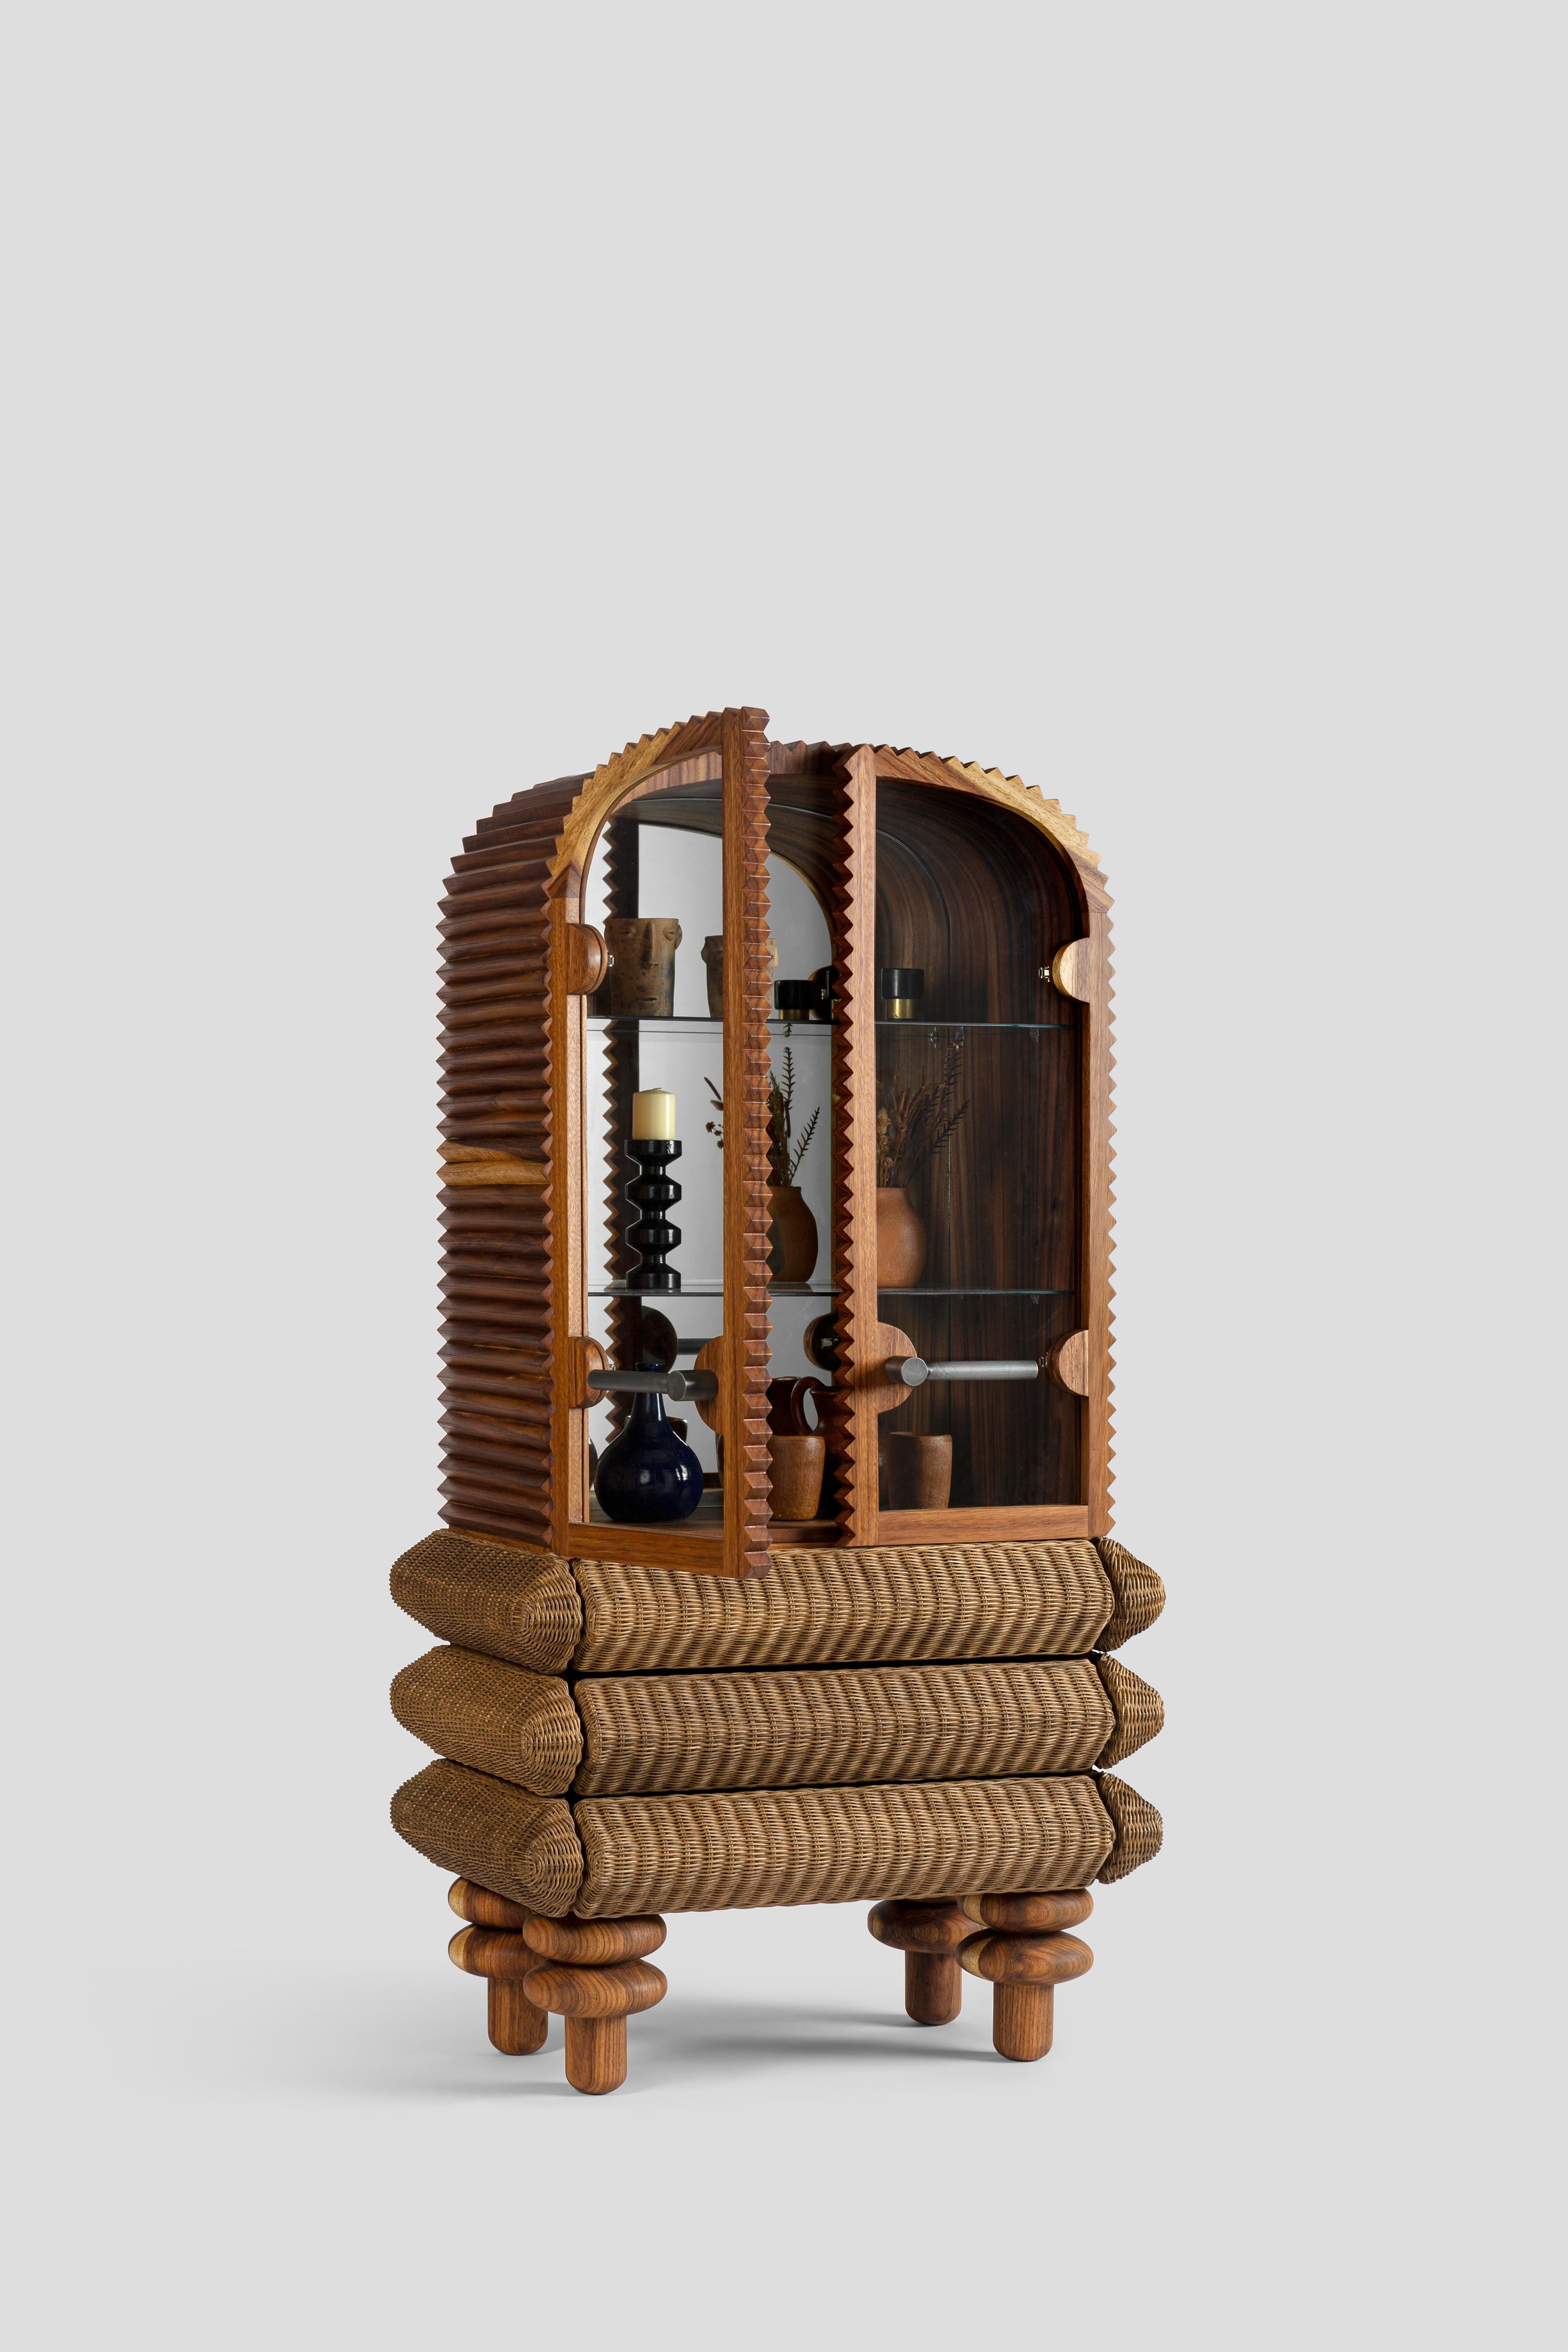 Vilma is a vertical display cabinet composed of two modules: a drawer unit covered with rattan fiber and a storage cabinet with solid huanacaxaxtle wood doors and glass shelves. The back of the cabinet is lined with mirror, which provides greater